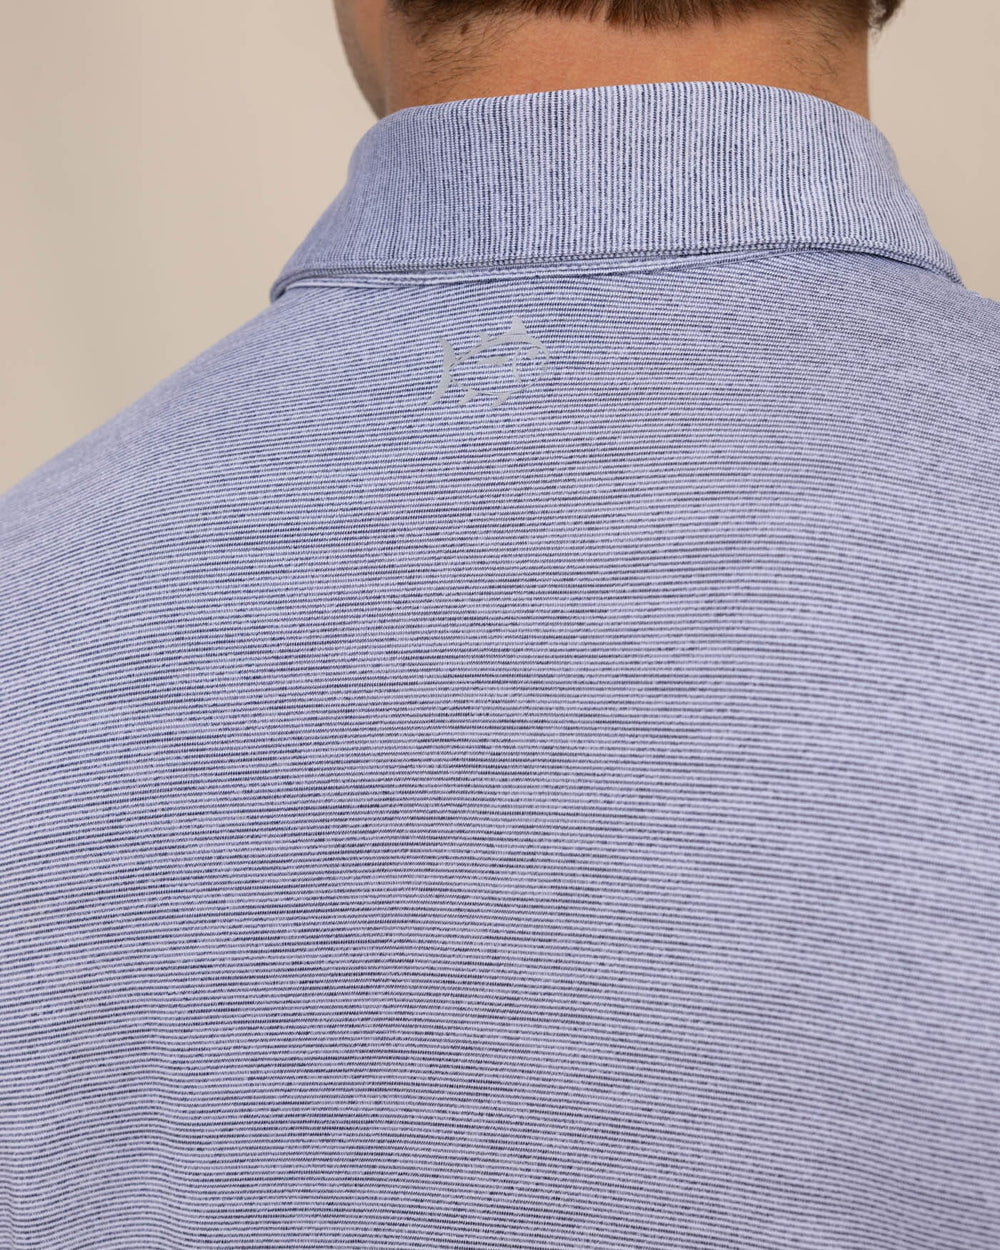 The detail view of the Southern Tide Team Colors Driver Spacedye Polo Shirt by Southern Tide - Navy